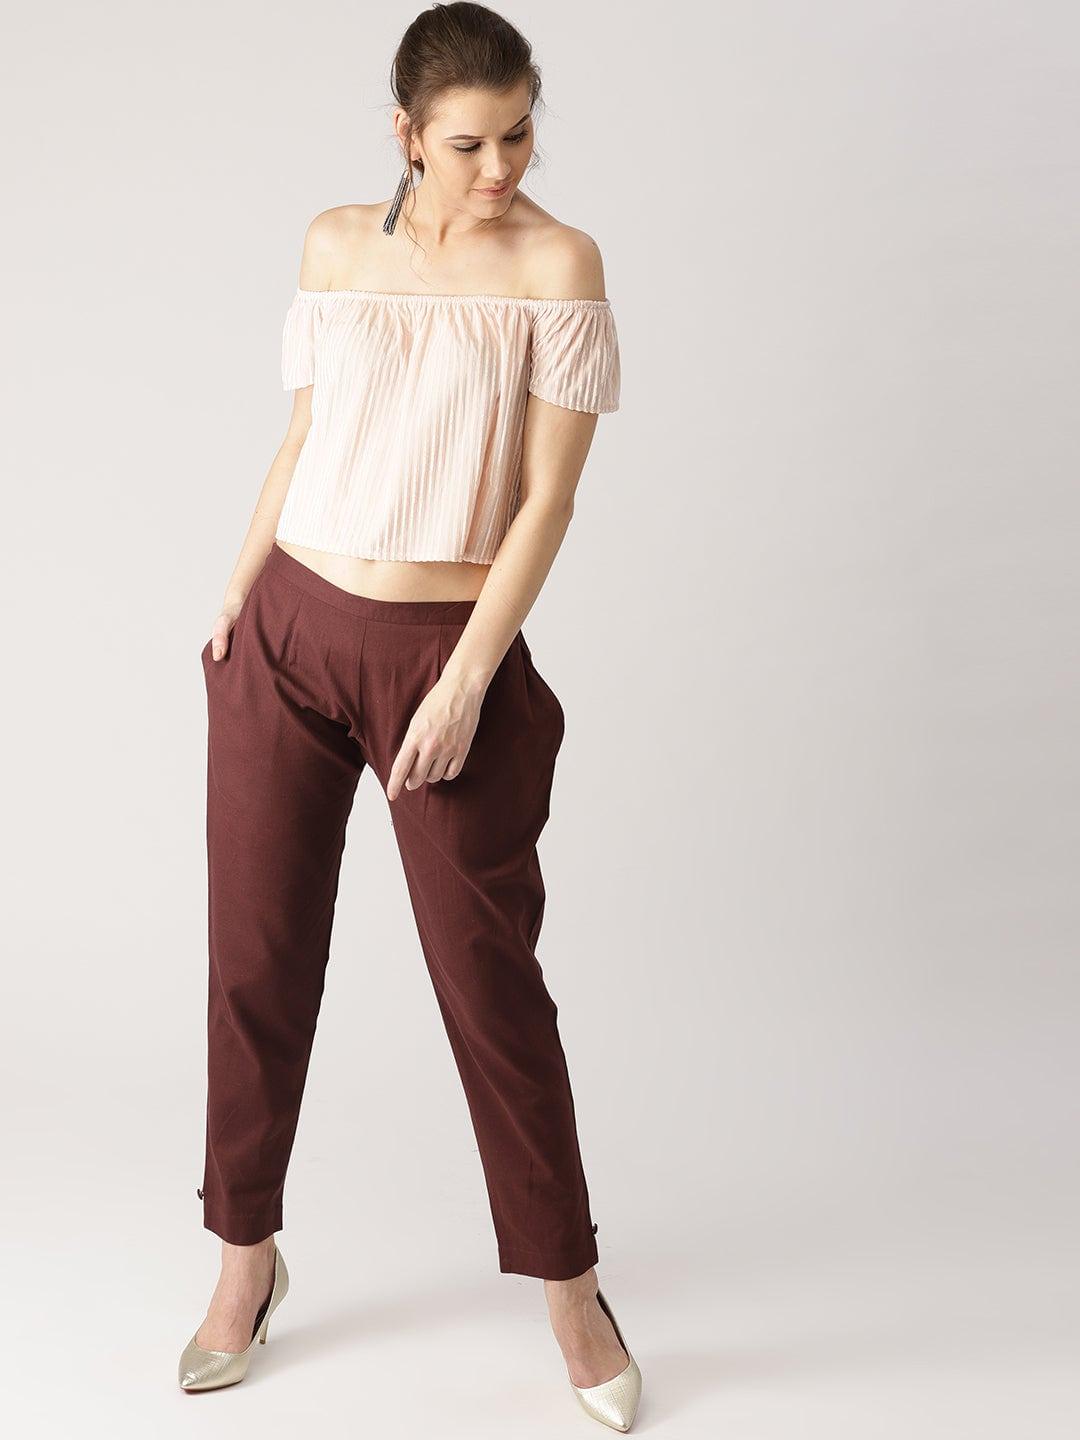 Brown Solid Cotton Trousers